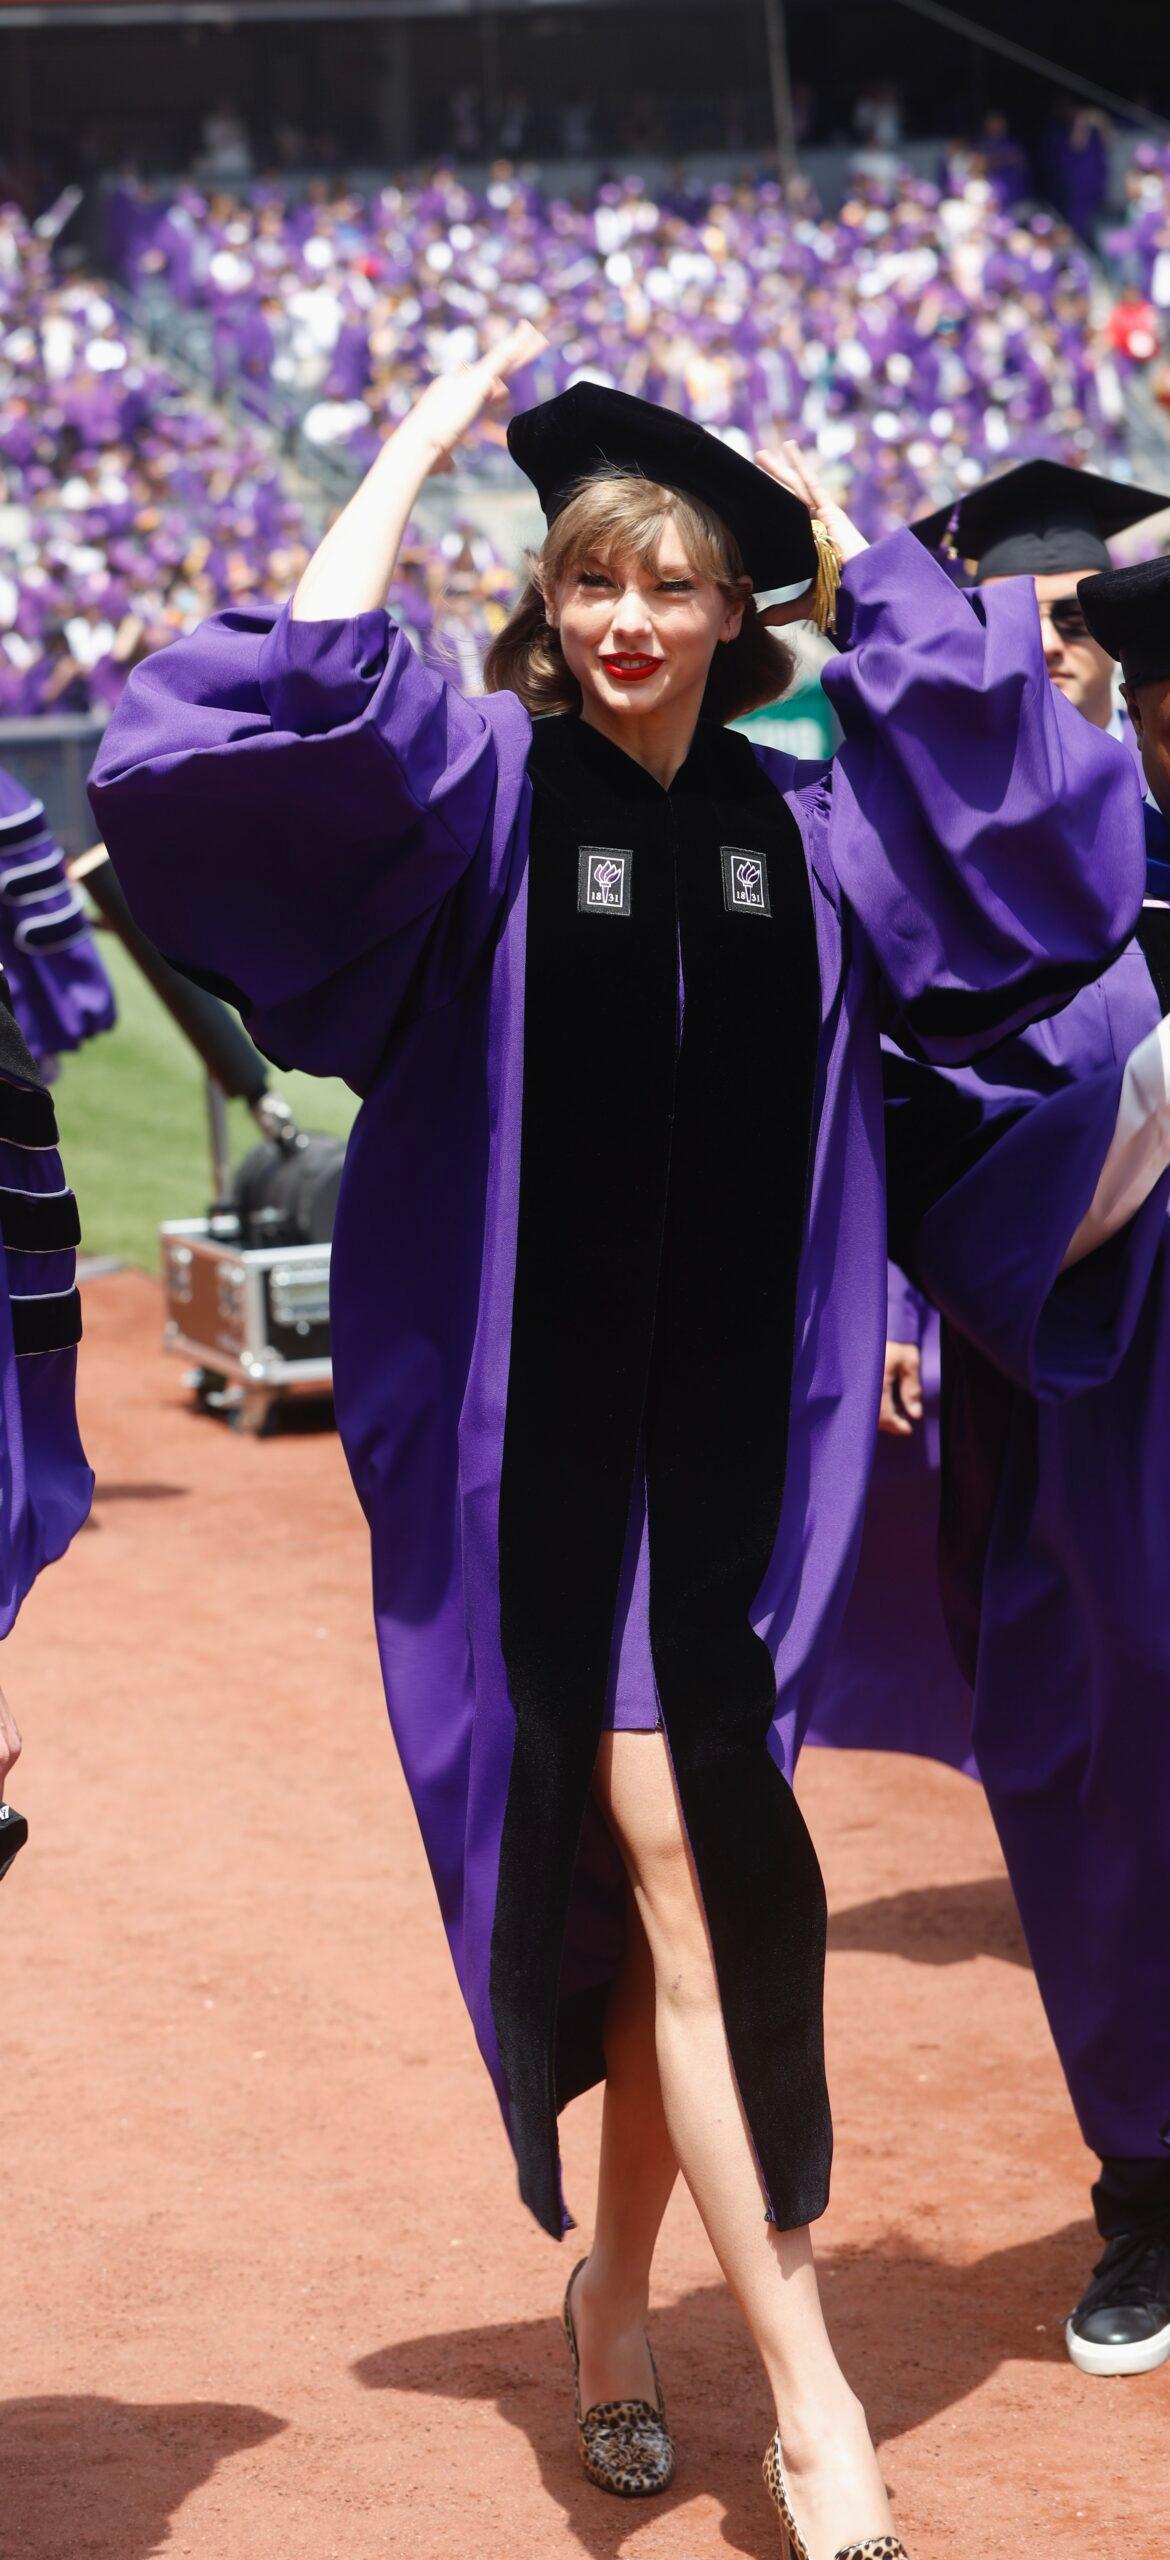 Taylor Swift at NYU as she receives honorary Doctor of Fine Arts degree